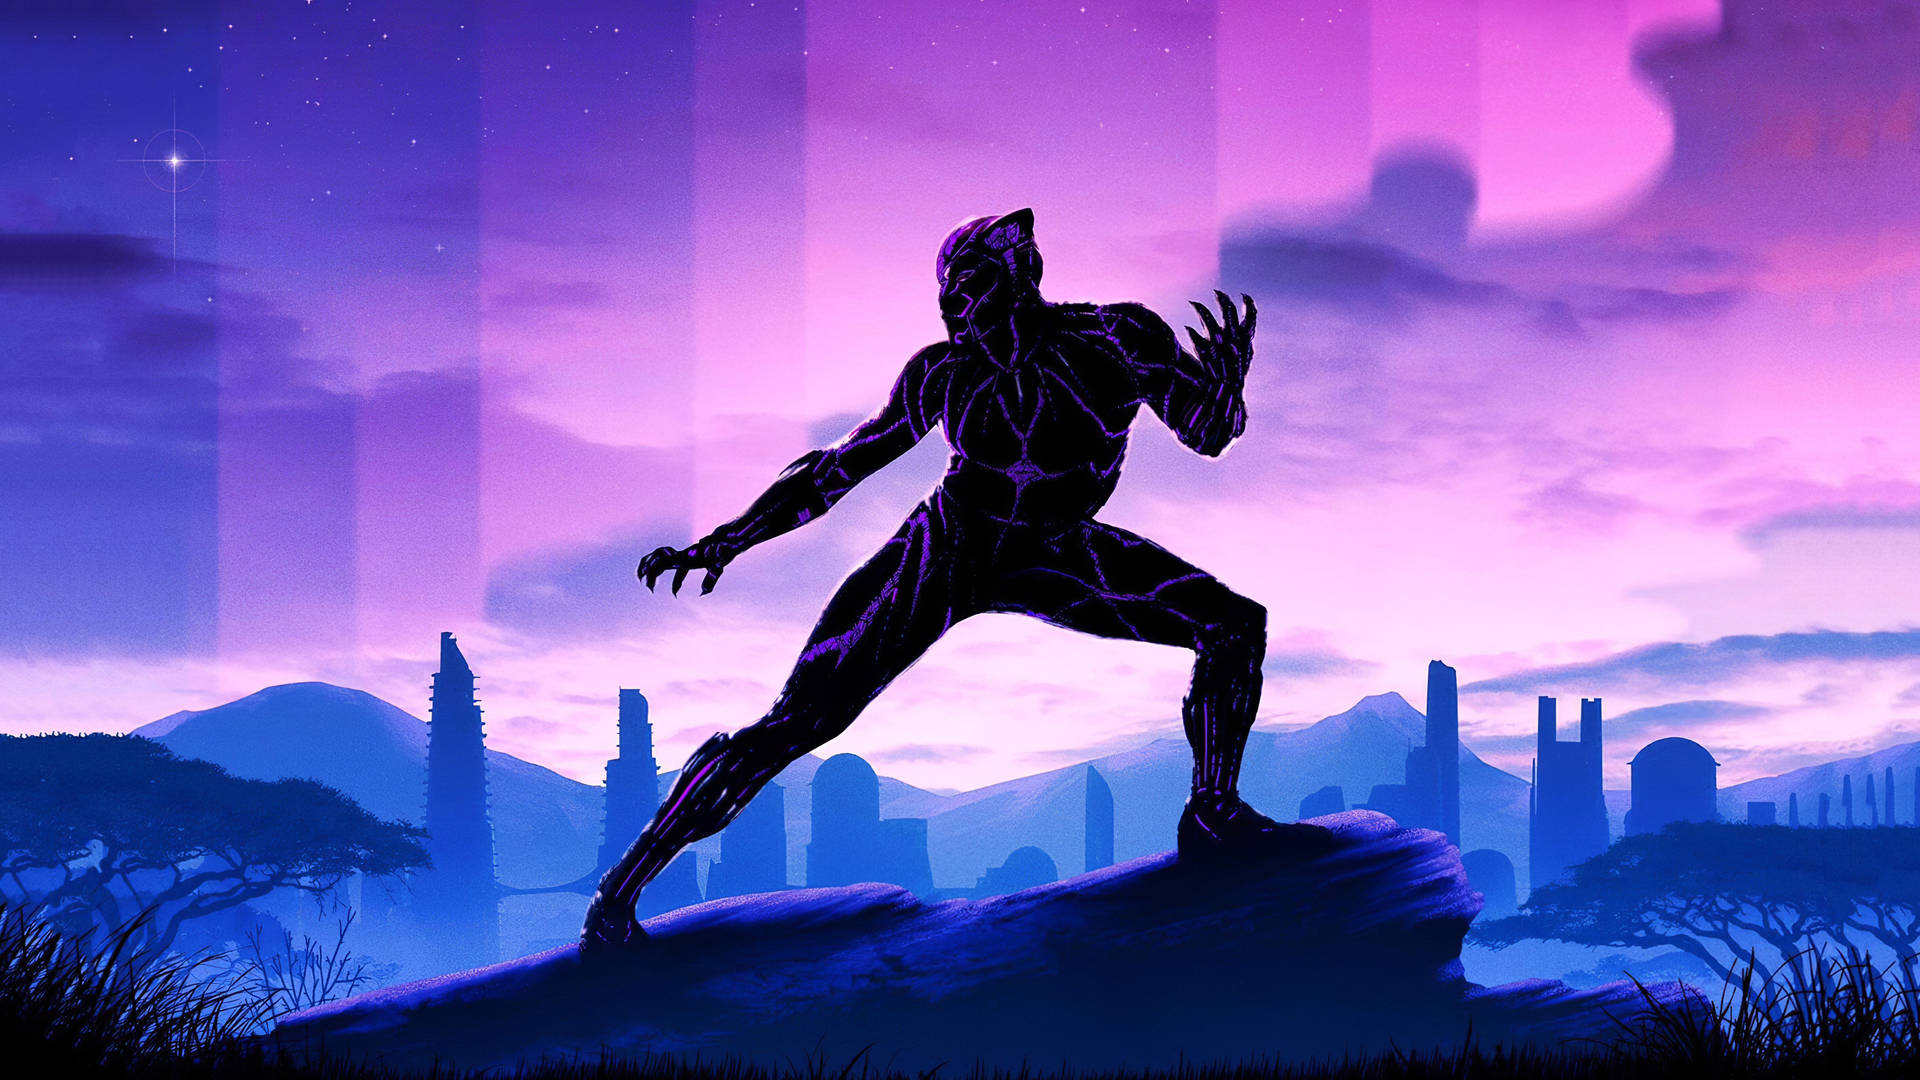 Black Panther In Defense Stance